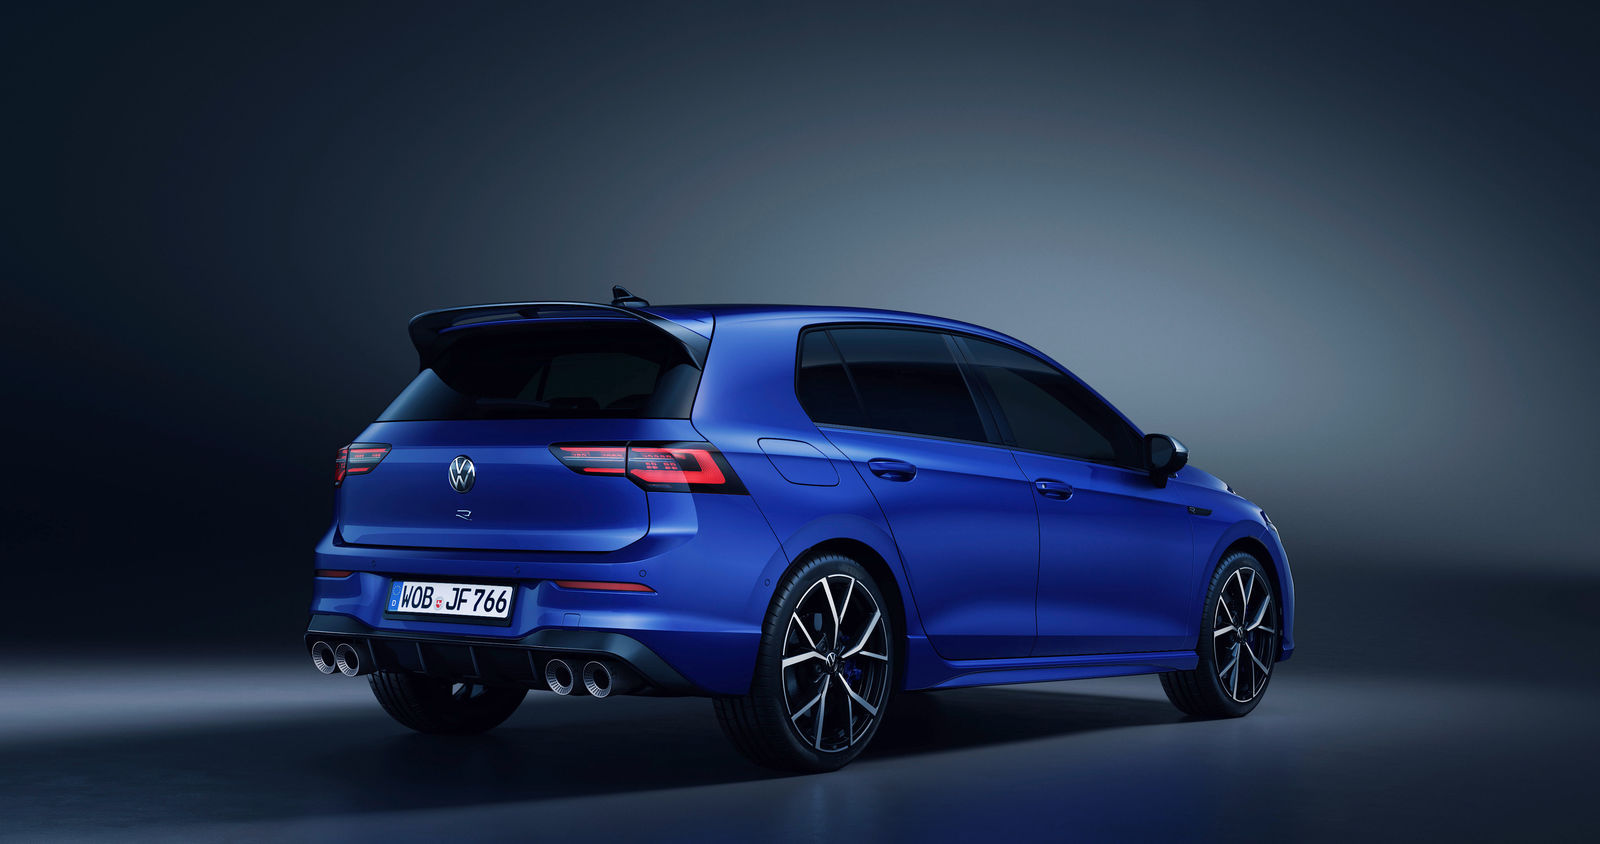 The new Golf R gets off to a flying start: world premiere of the most  powerful series-production Golf of all times | Volkswagen Newsroom